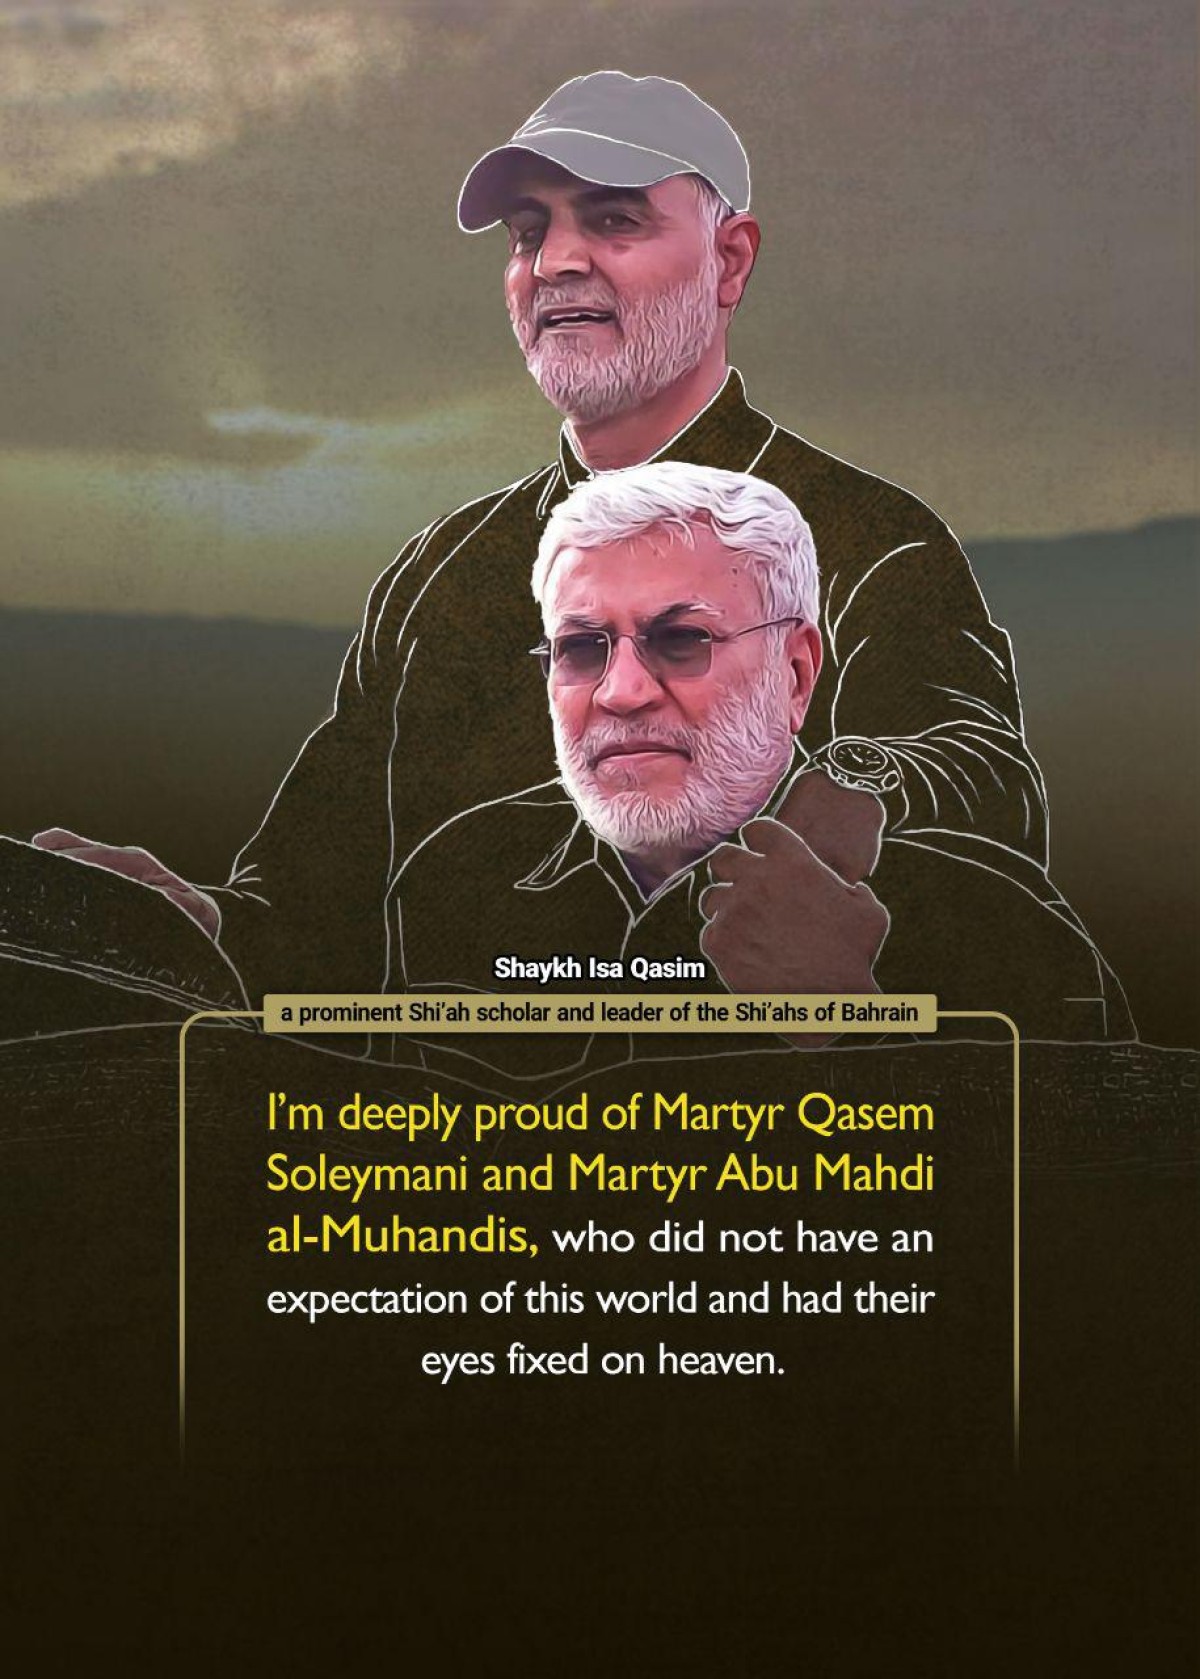 The words of the elders about the martyrs Qasem Soleymani and Abu Mahdi al-Mohandes 8